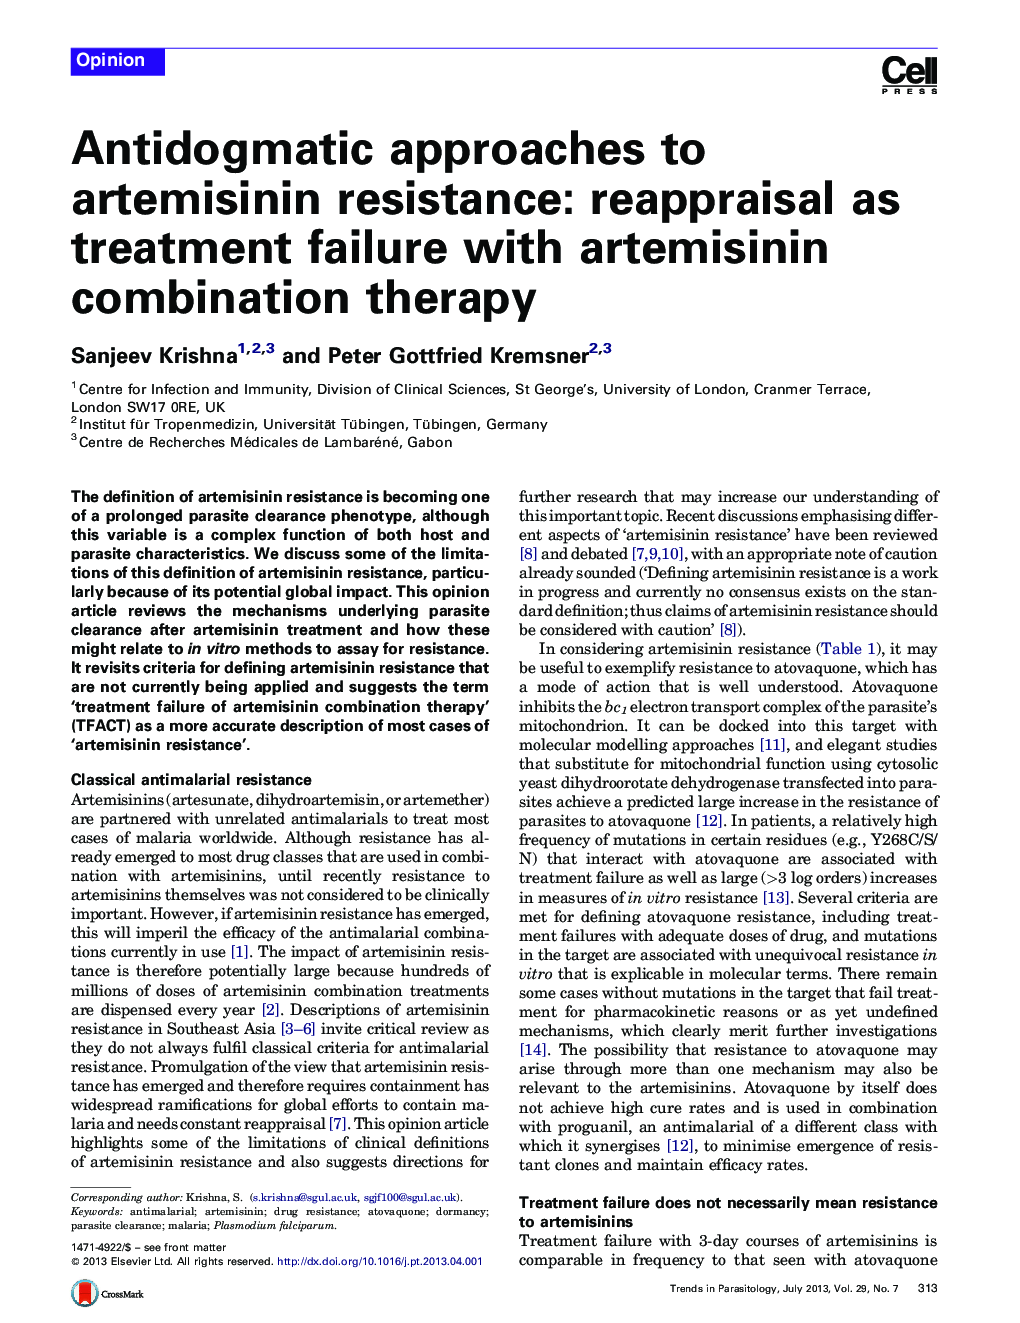 Antidogmatic approaches to artemisinin resistance: reappraisal as treatment failure with artemisinin combination therapy